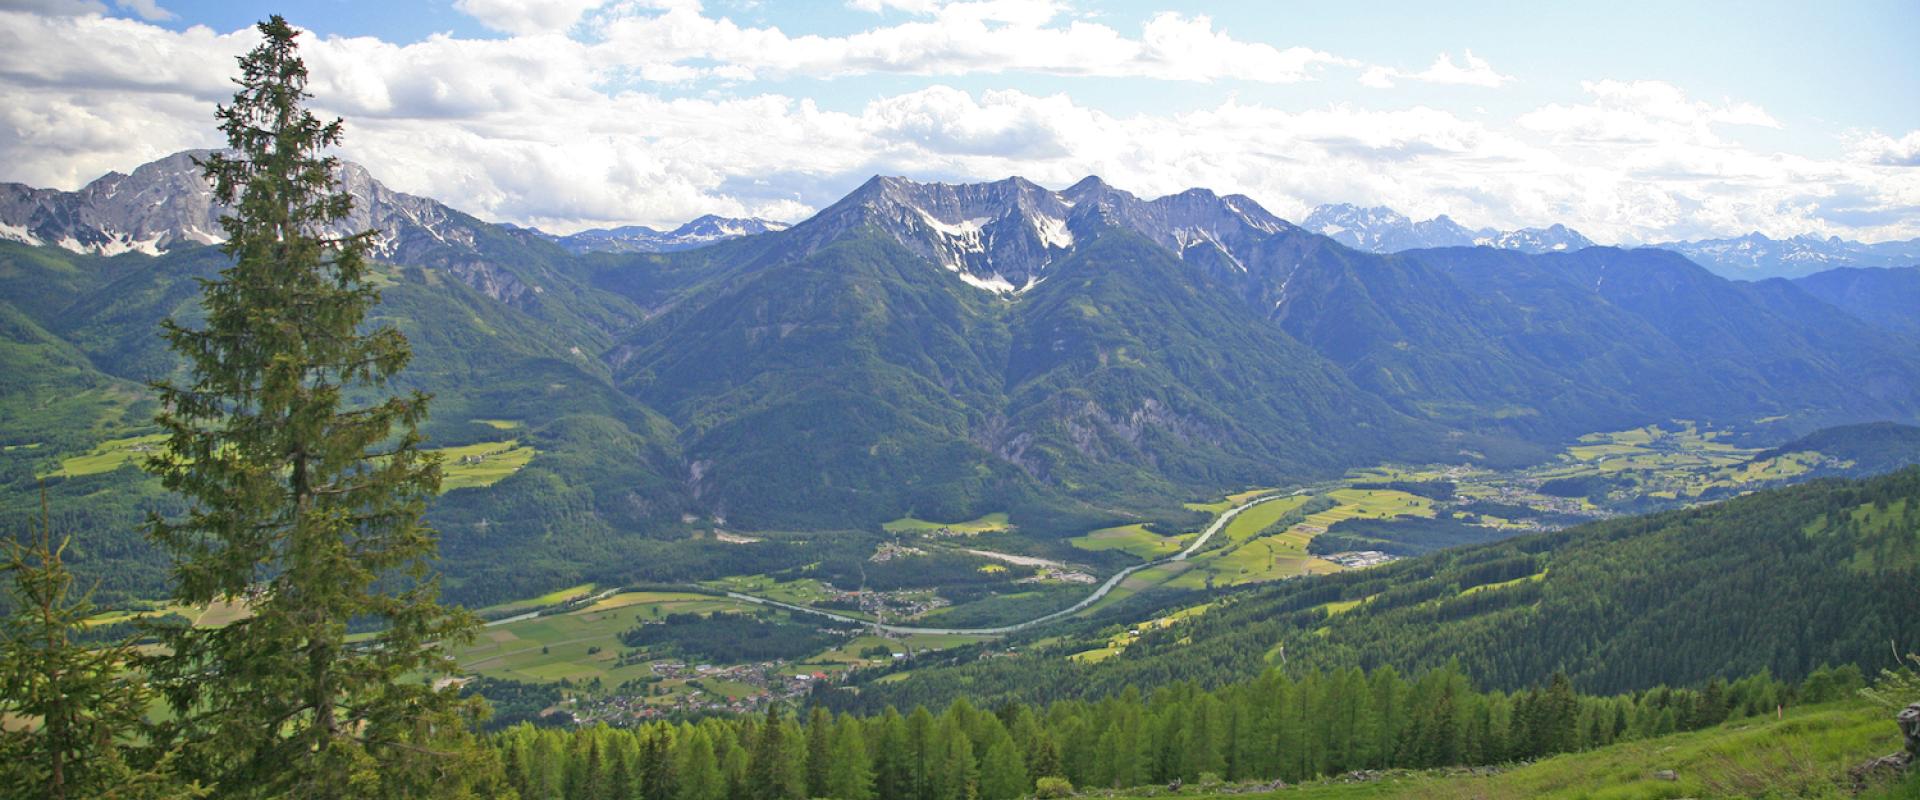 Emberger Alm 